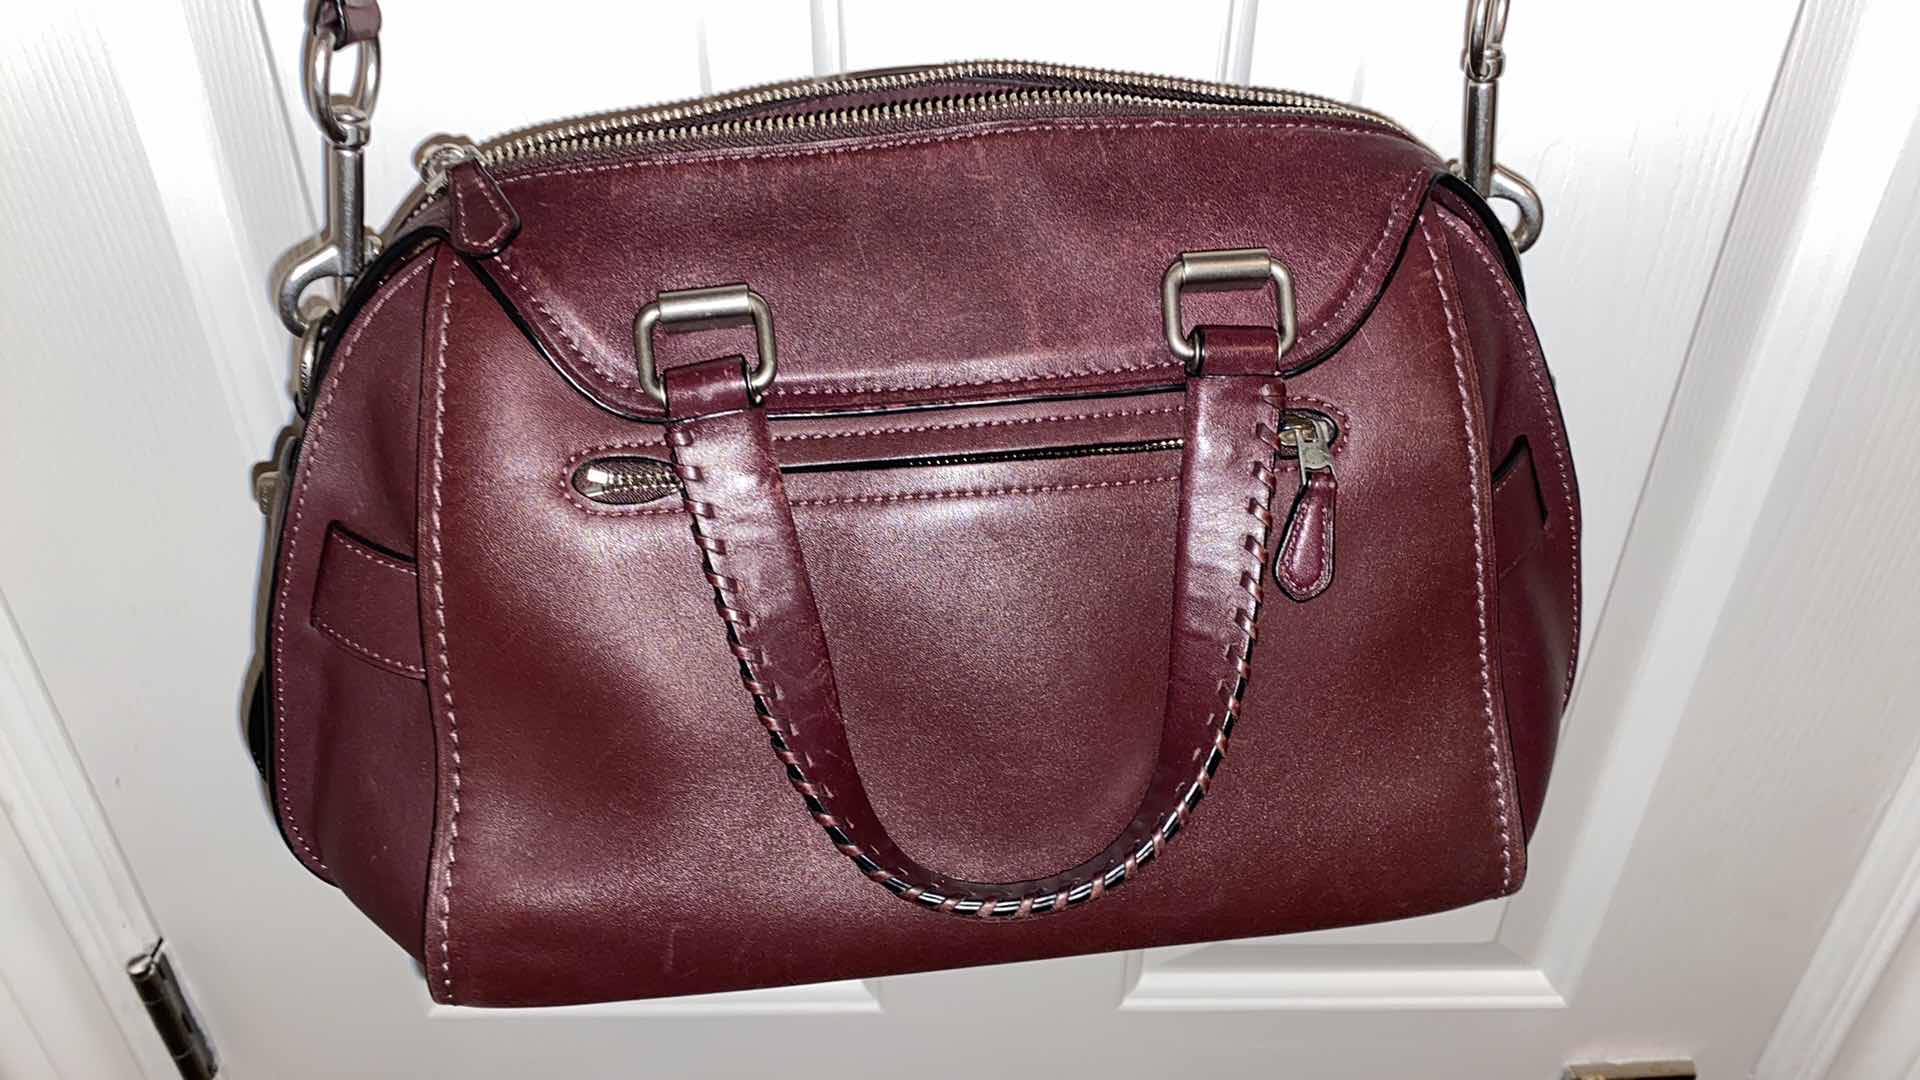 Photo 7 of $869 AUTHENTIC COACH ACE SATCHEL IN BURGUNDY WITH STRAP, WHIPSTITCHED HANDLES AND GUNMETAL HARDWARE INCLUDES DUSTBAG- NON RETURABLE - FINAL SALE